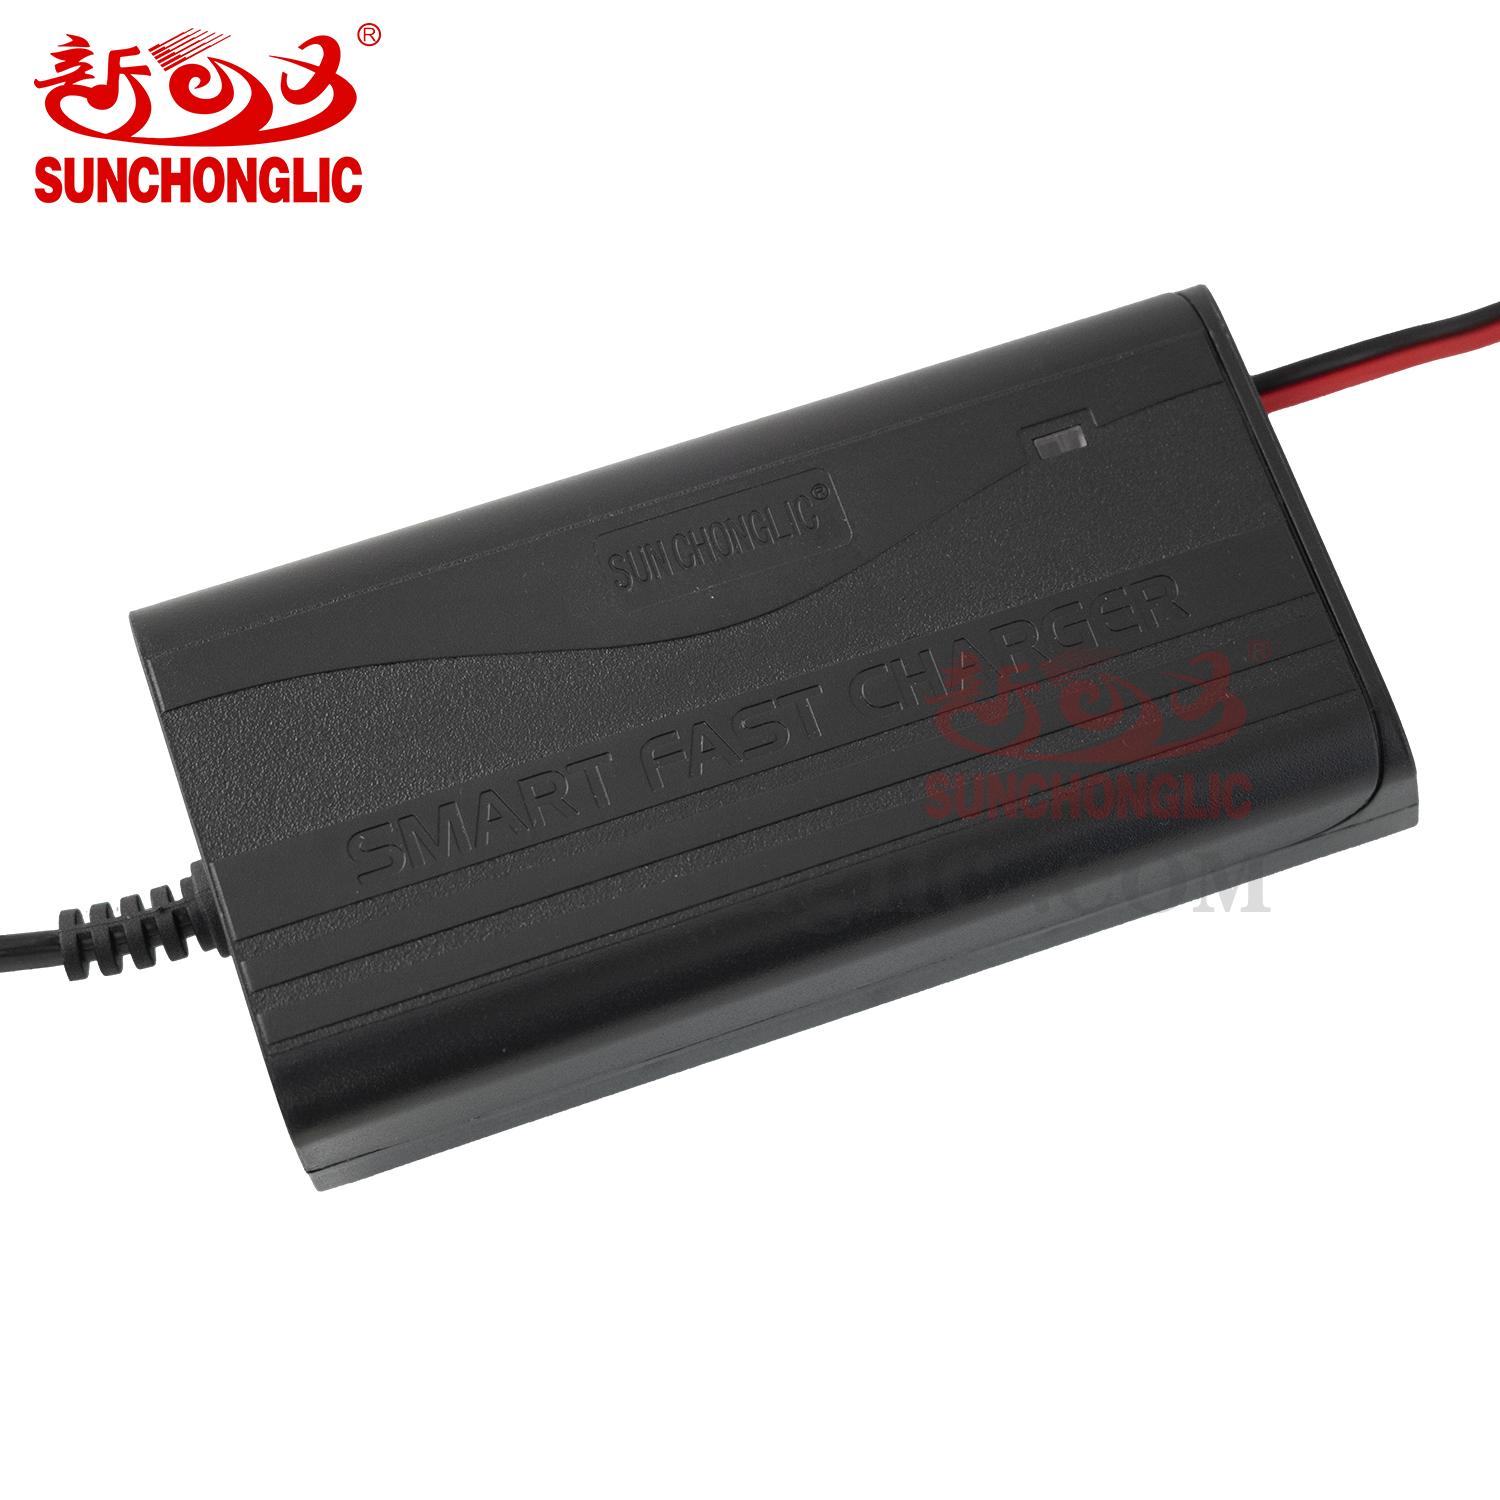 12v battery charger 5A 5amp lead acid battery charger